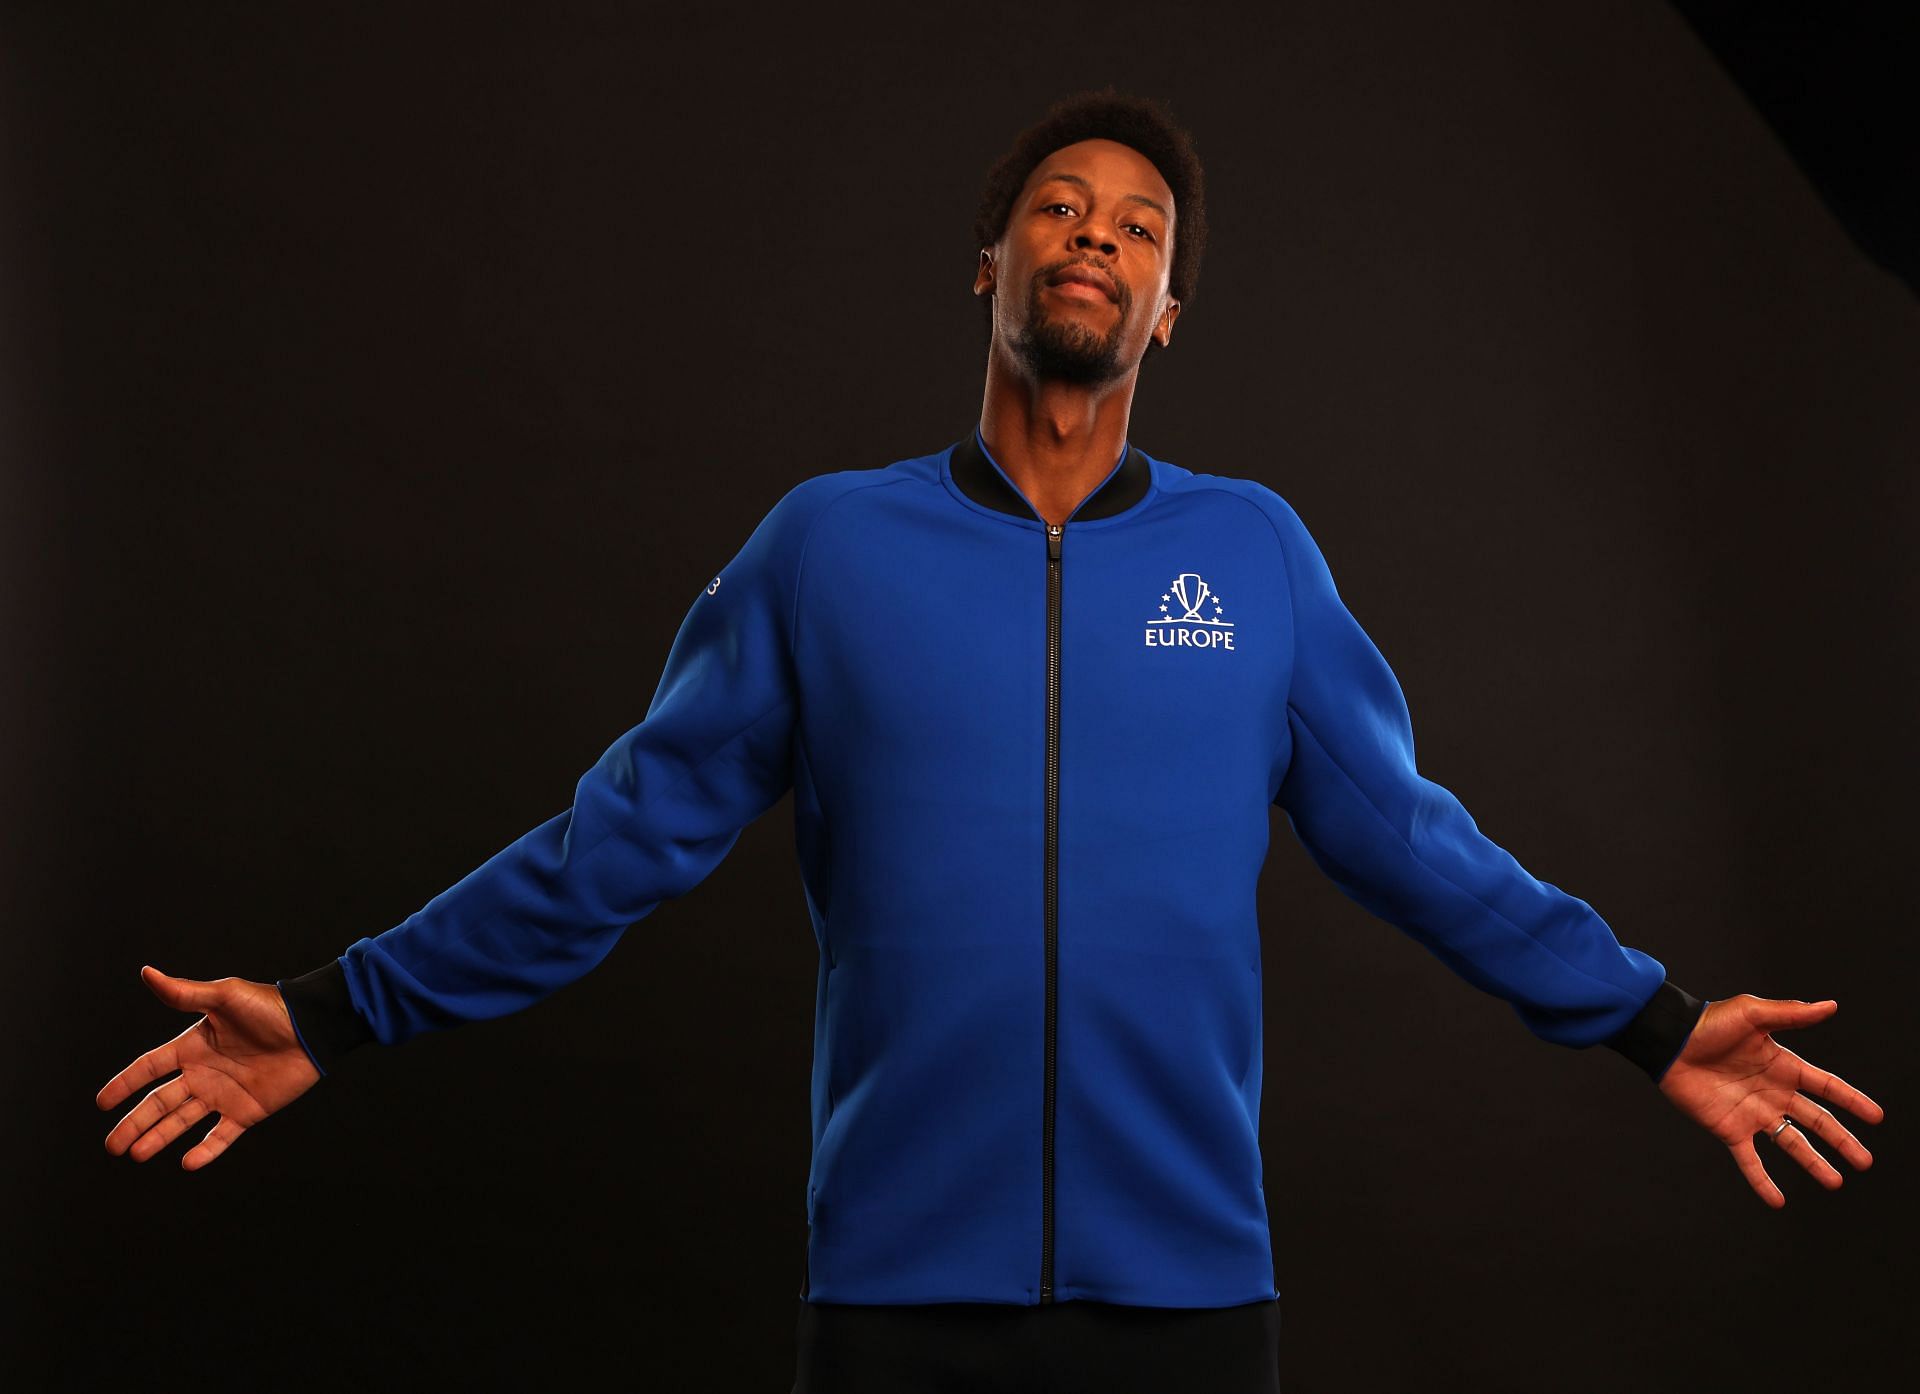 Gael Monfils during a photo session at Laver Cup.